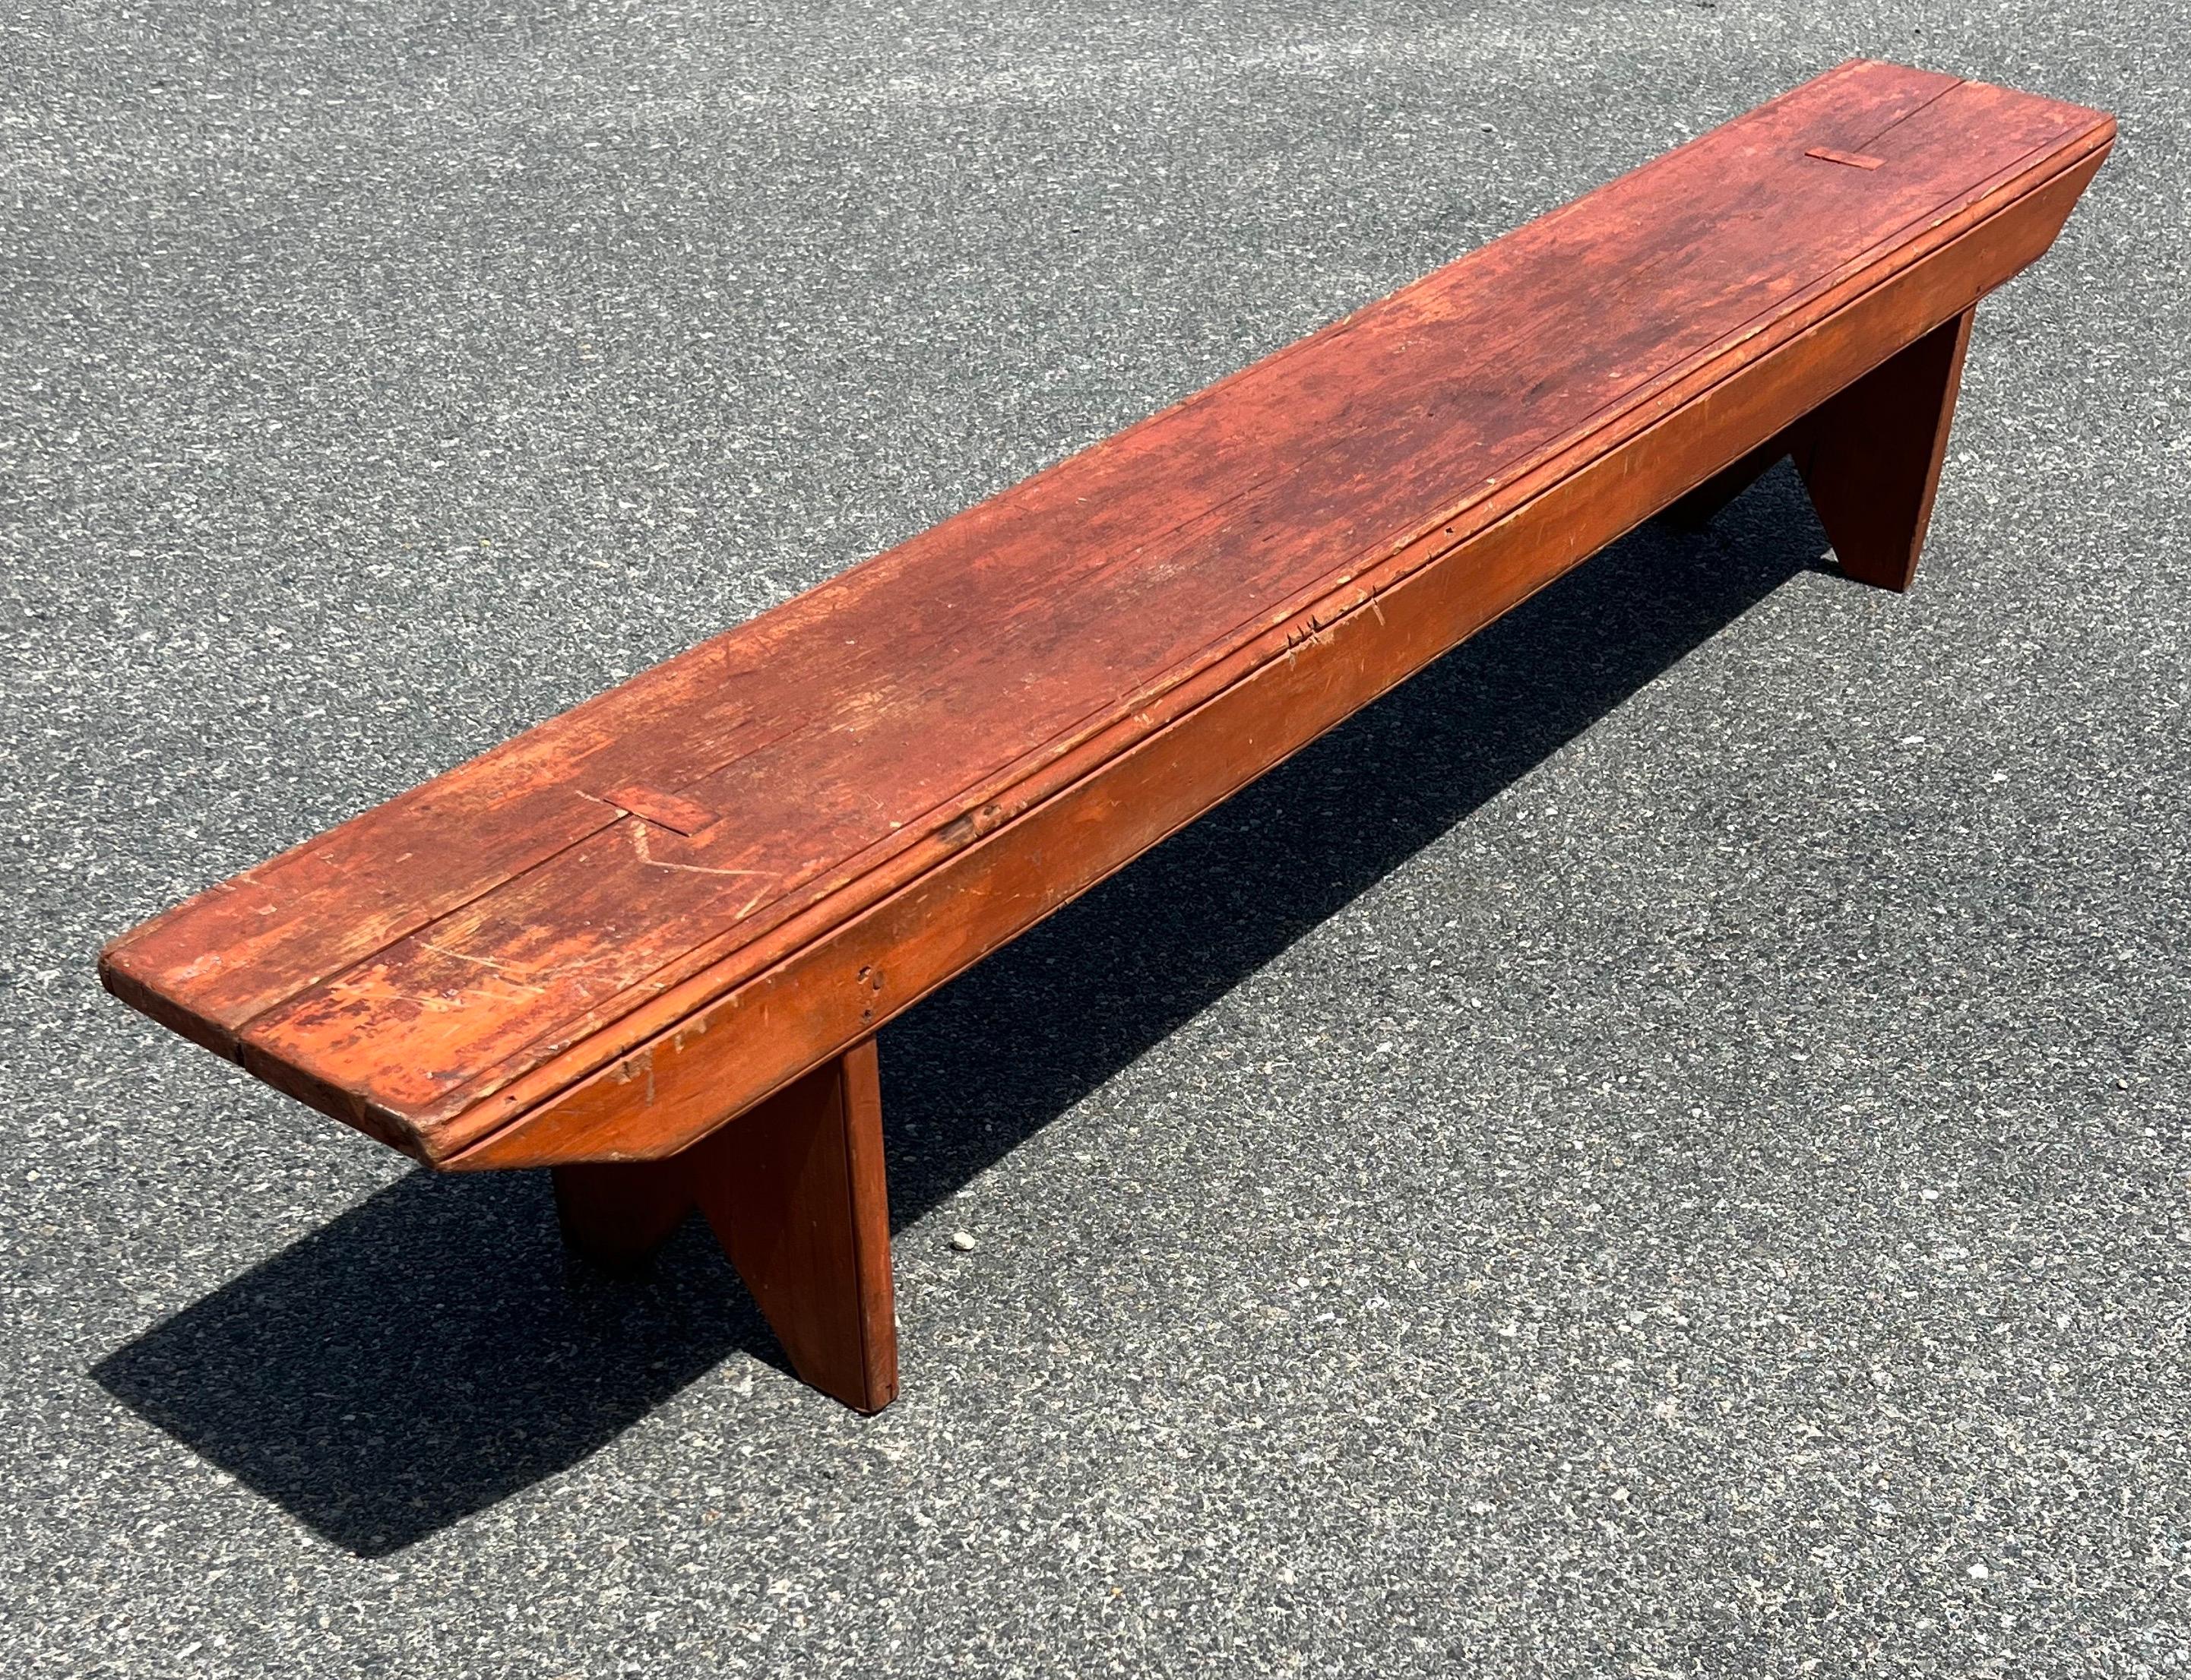 19th Century Pine Bench in rather long size.  With original orange paint and boot jack legs.  